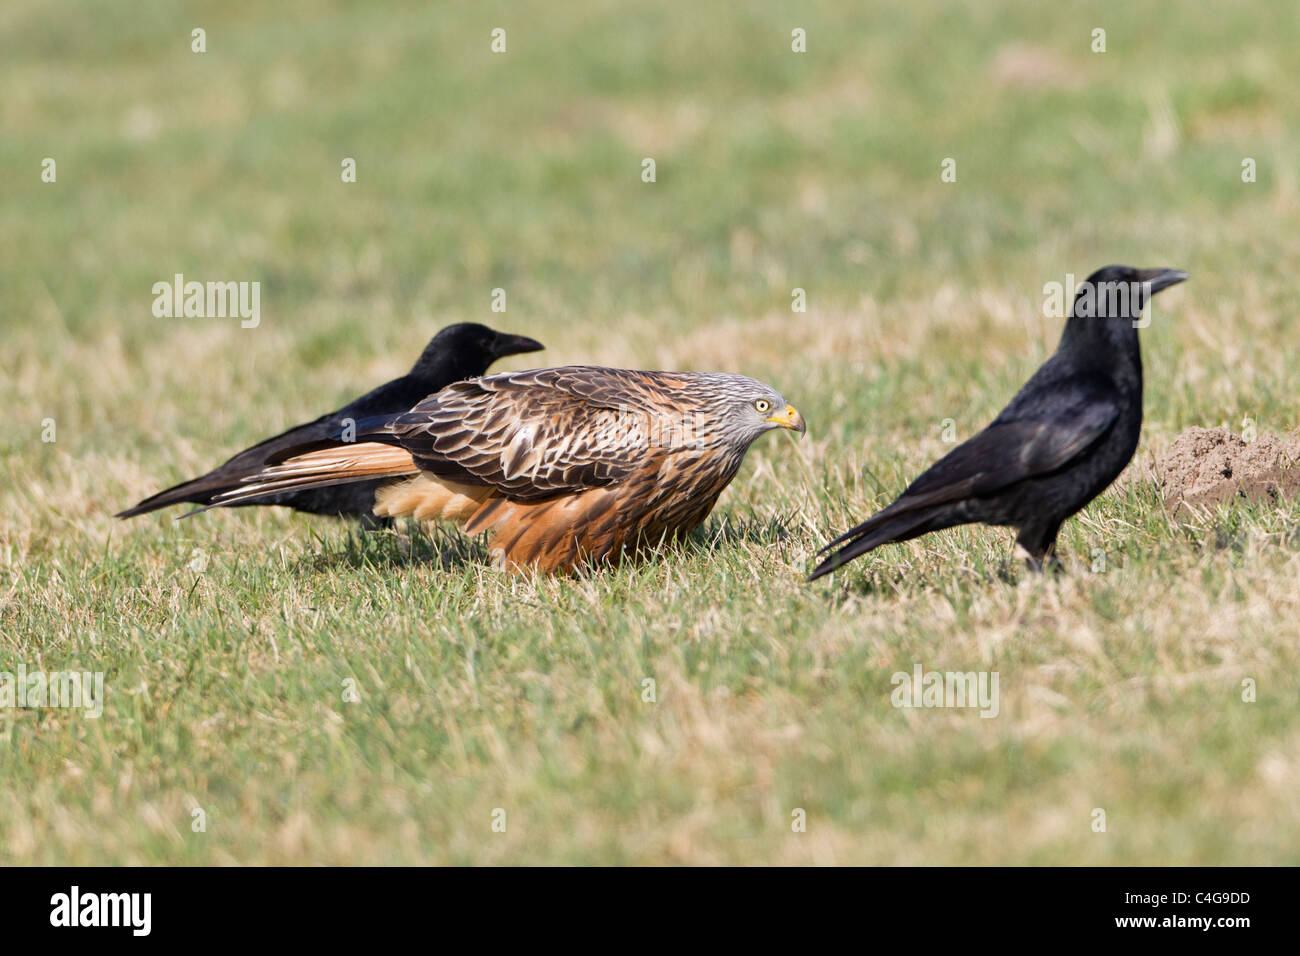 Red Kite, (Milvus milvus) and Carrion Crows (Corvus corone), feeding on carrion, Lower Saxony, Germany Stock Photo